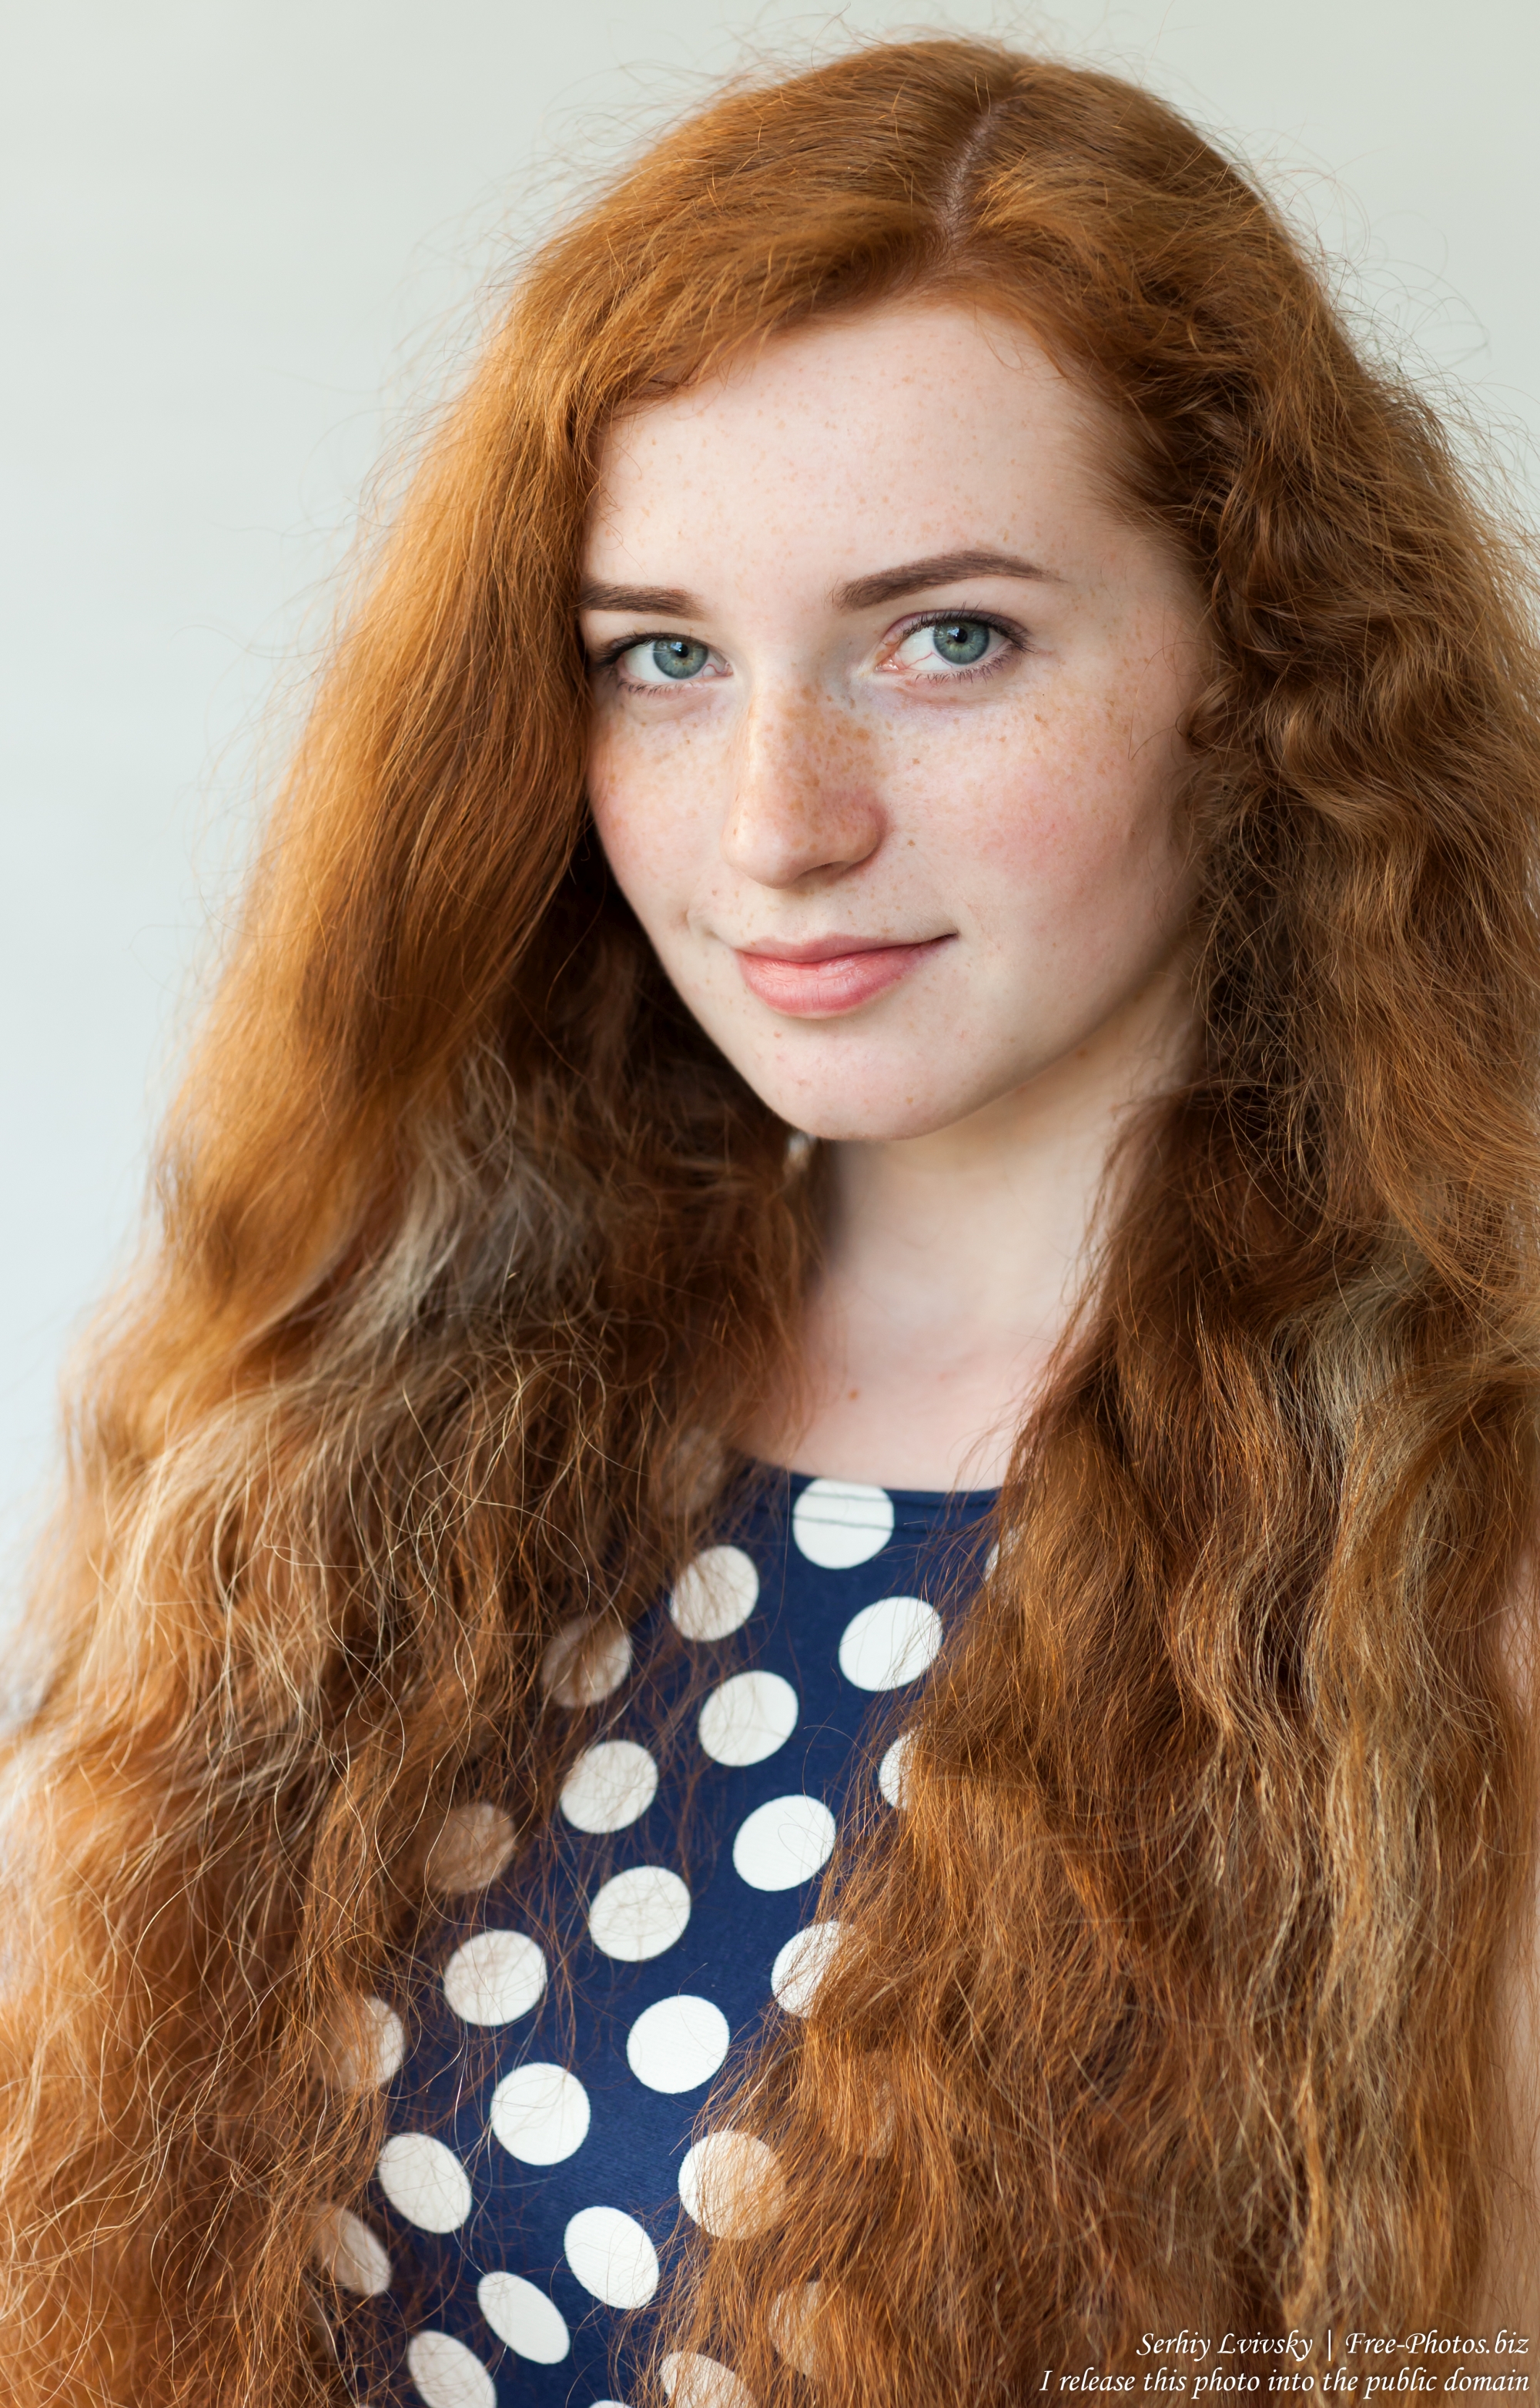 ania_a_19-year-old_natural_red-haired_girl_photographed_in_june_2017_by_serhiy_lvivsky_02